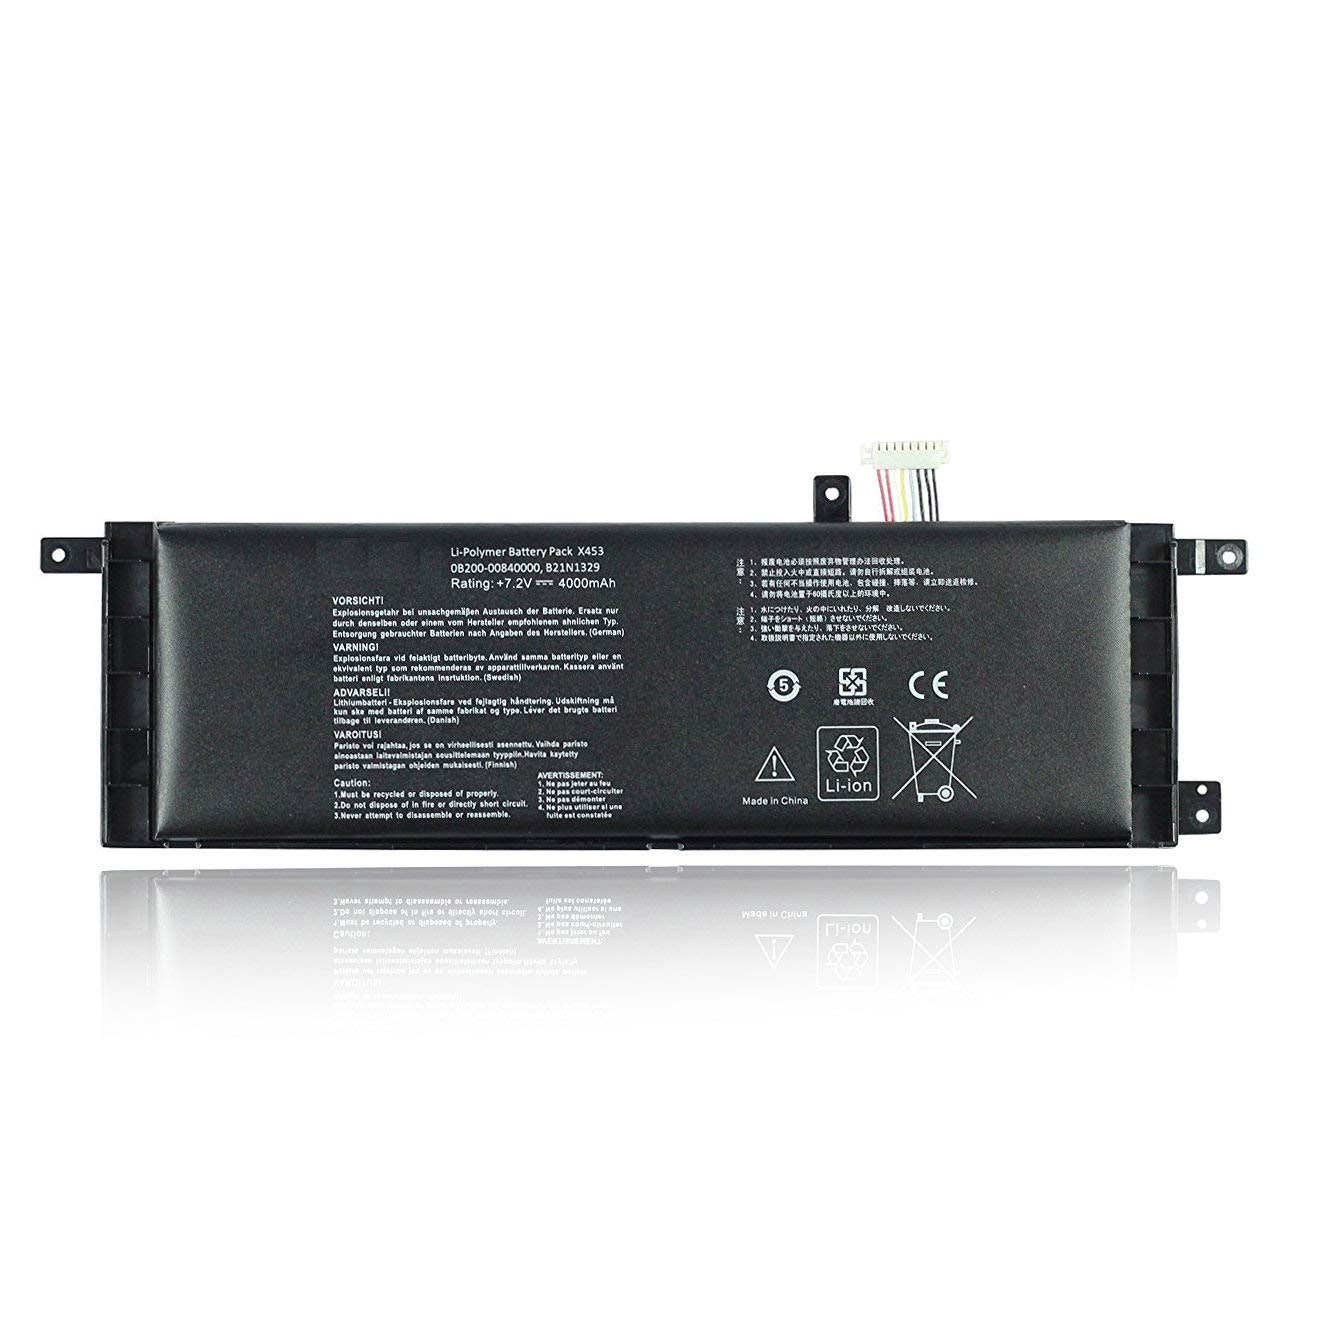 0B200-00840000, B21N1329 replacement Laptop Battery for Asus D553M, F453, 7.6V, 30wh